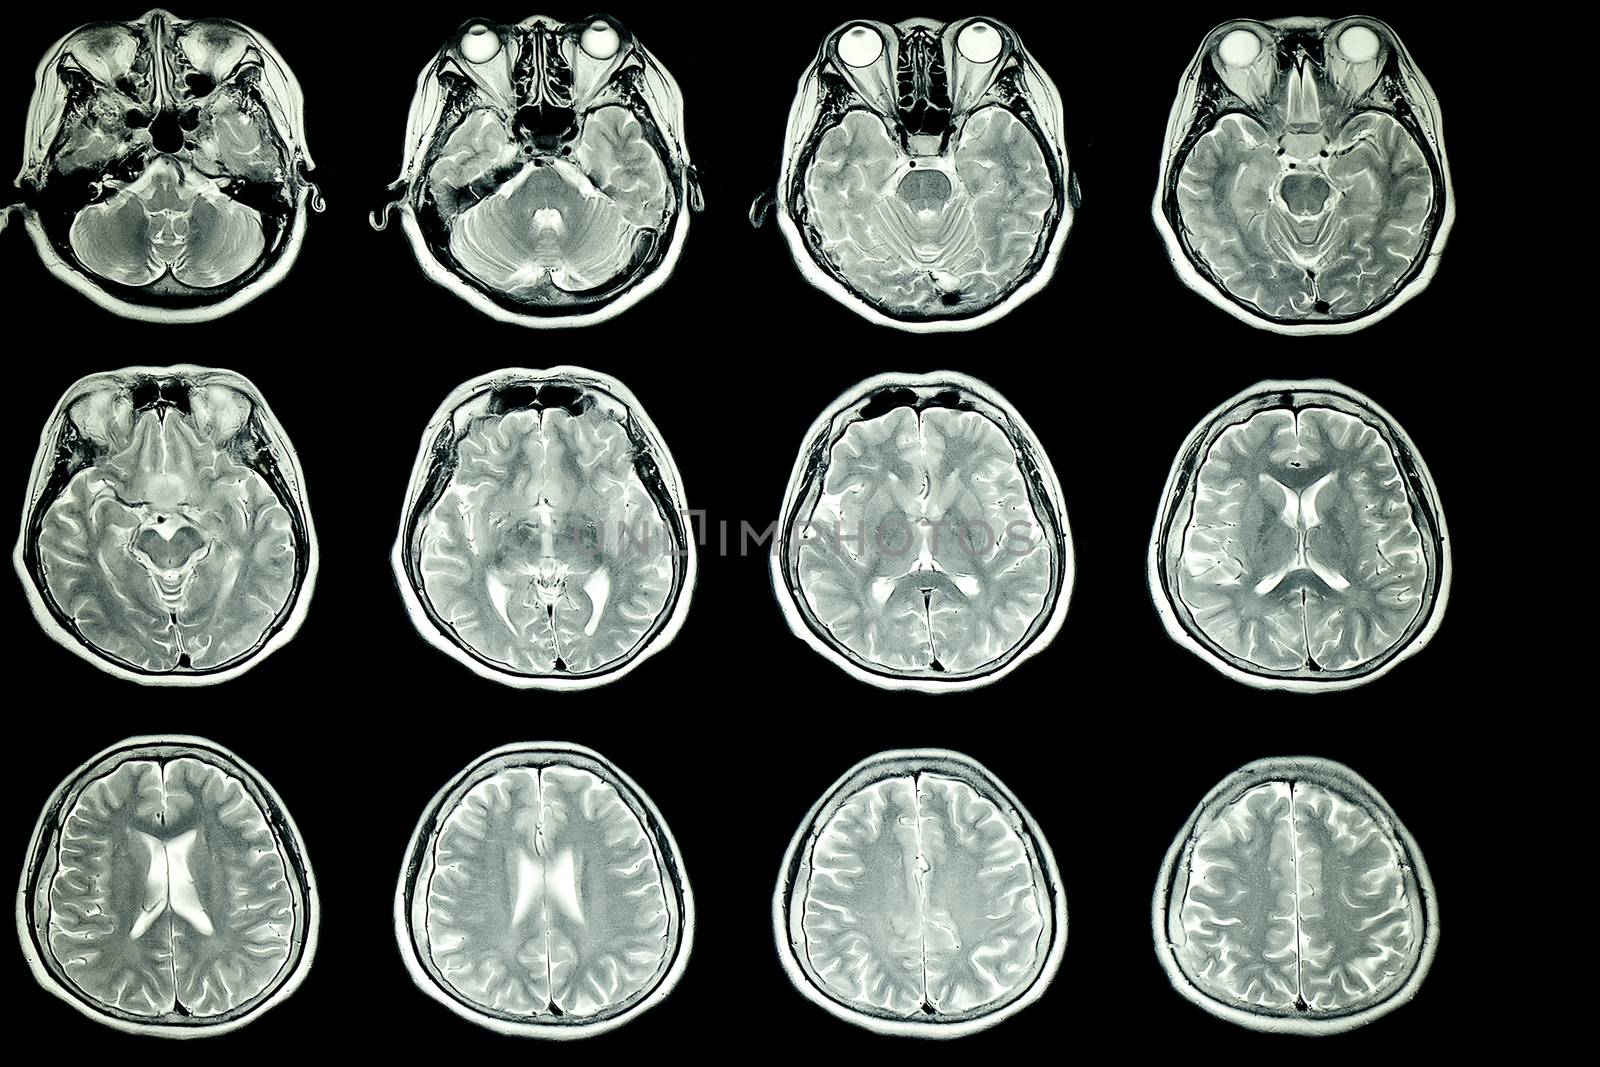 MRI scan of patient brain with normal signal intensity of the brain parenchyma